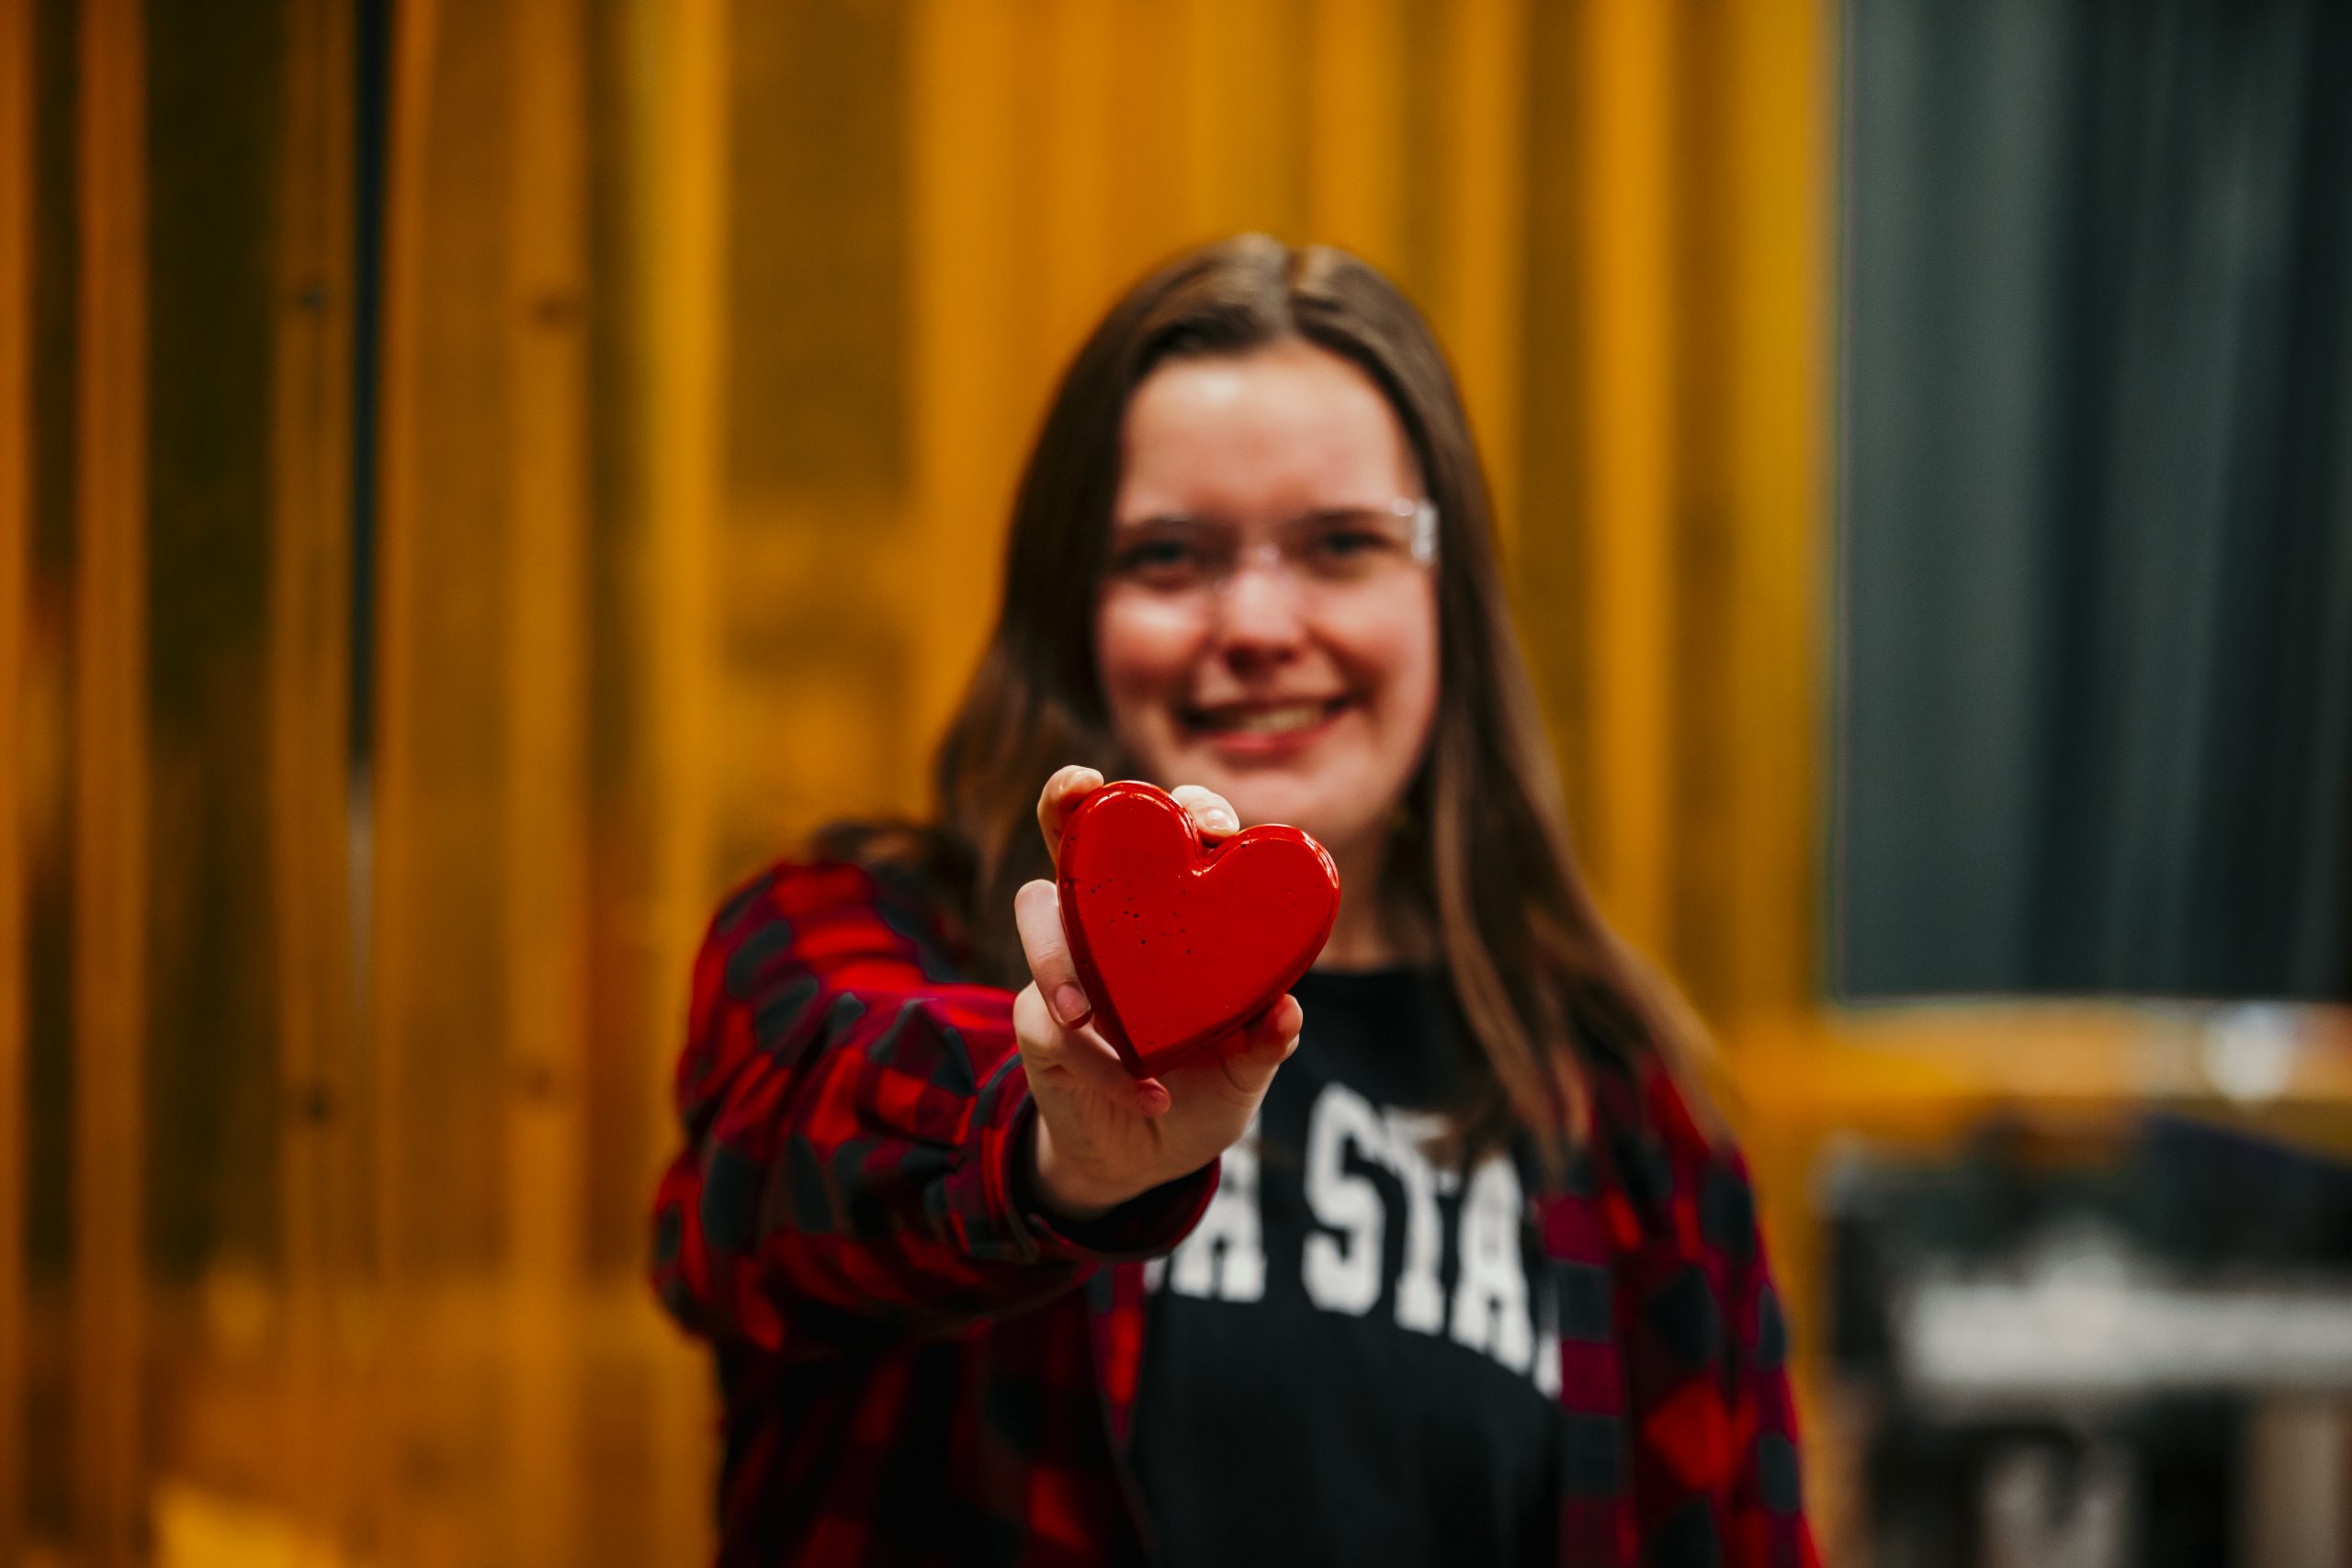 Claire Palmer holding a red concrete heart towards the camera